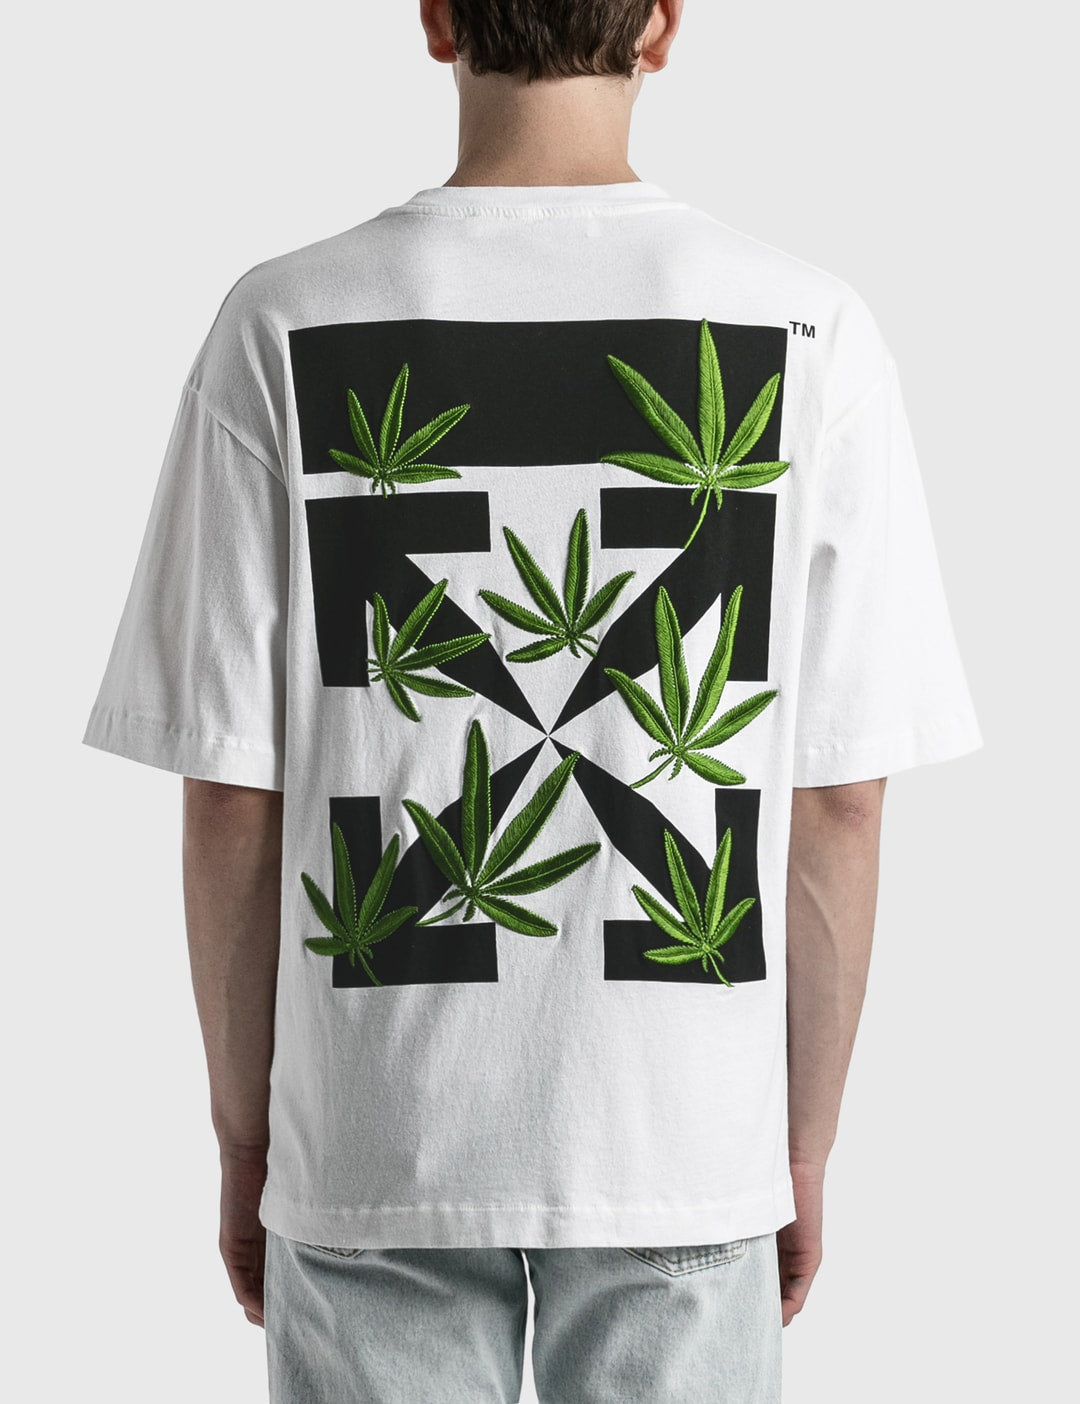 Off-White Weed Arrows Over Skate S/S T-Shirt White | Hype Vault Kuala Lumpur | Asia's Top Trusted High-End Sneakers and Streetwear Store